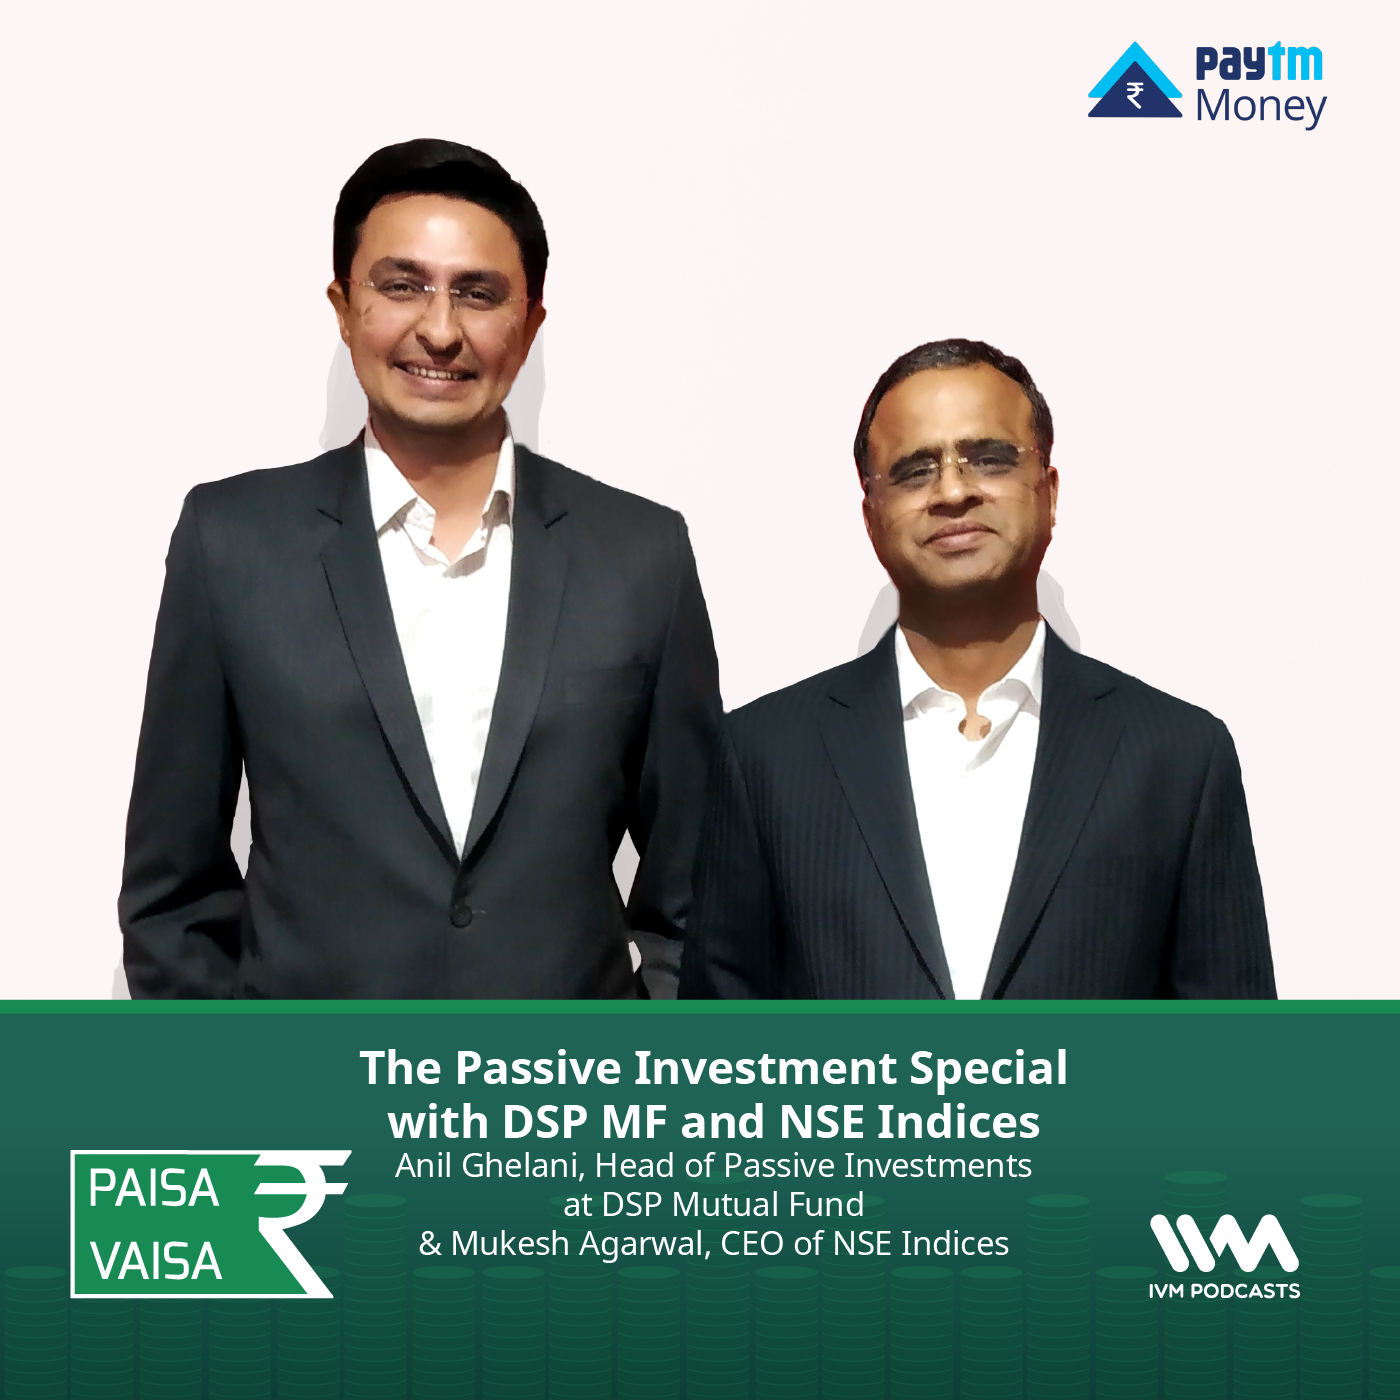 Ep. 180: The Passive Investment Special with DSP MF and NSE Indices.